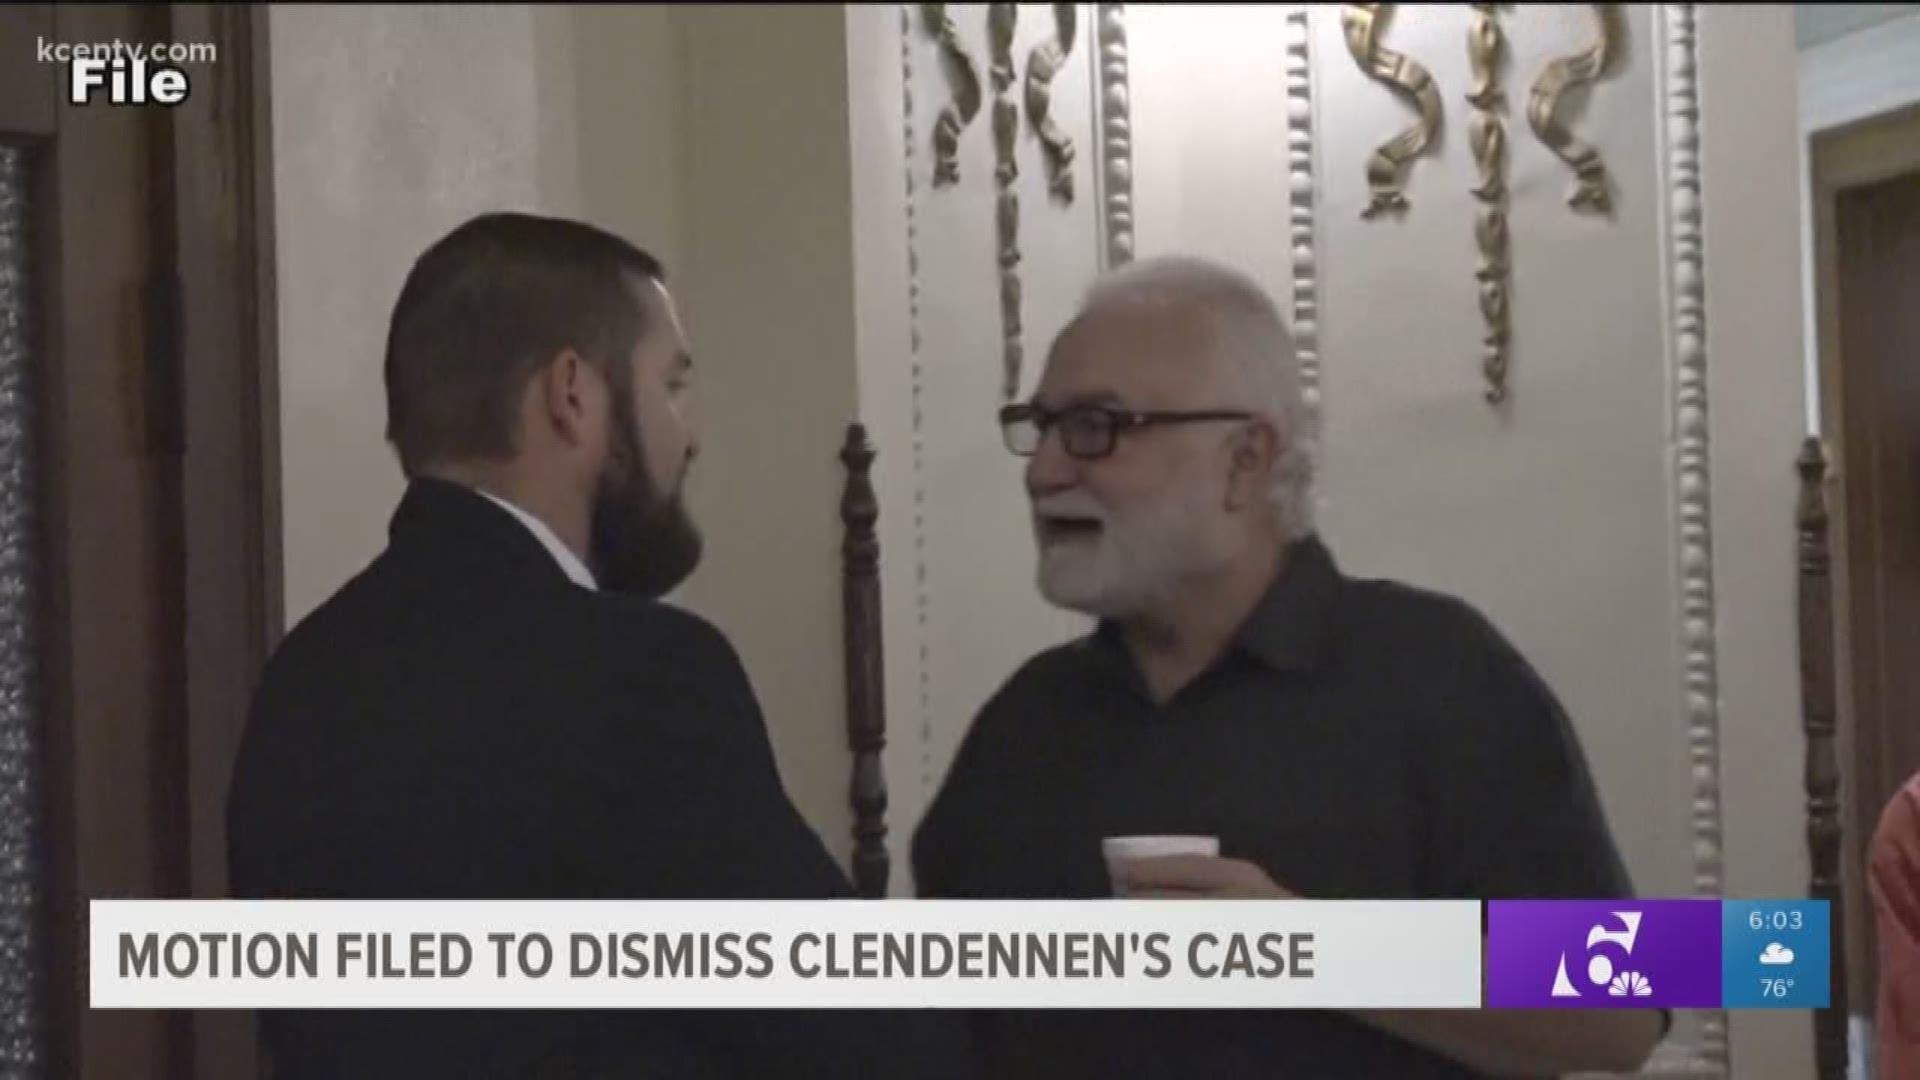 A motion was filed to dismiss the case against former Scimitars motorcycle club member Matthew Clendennen.